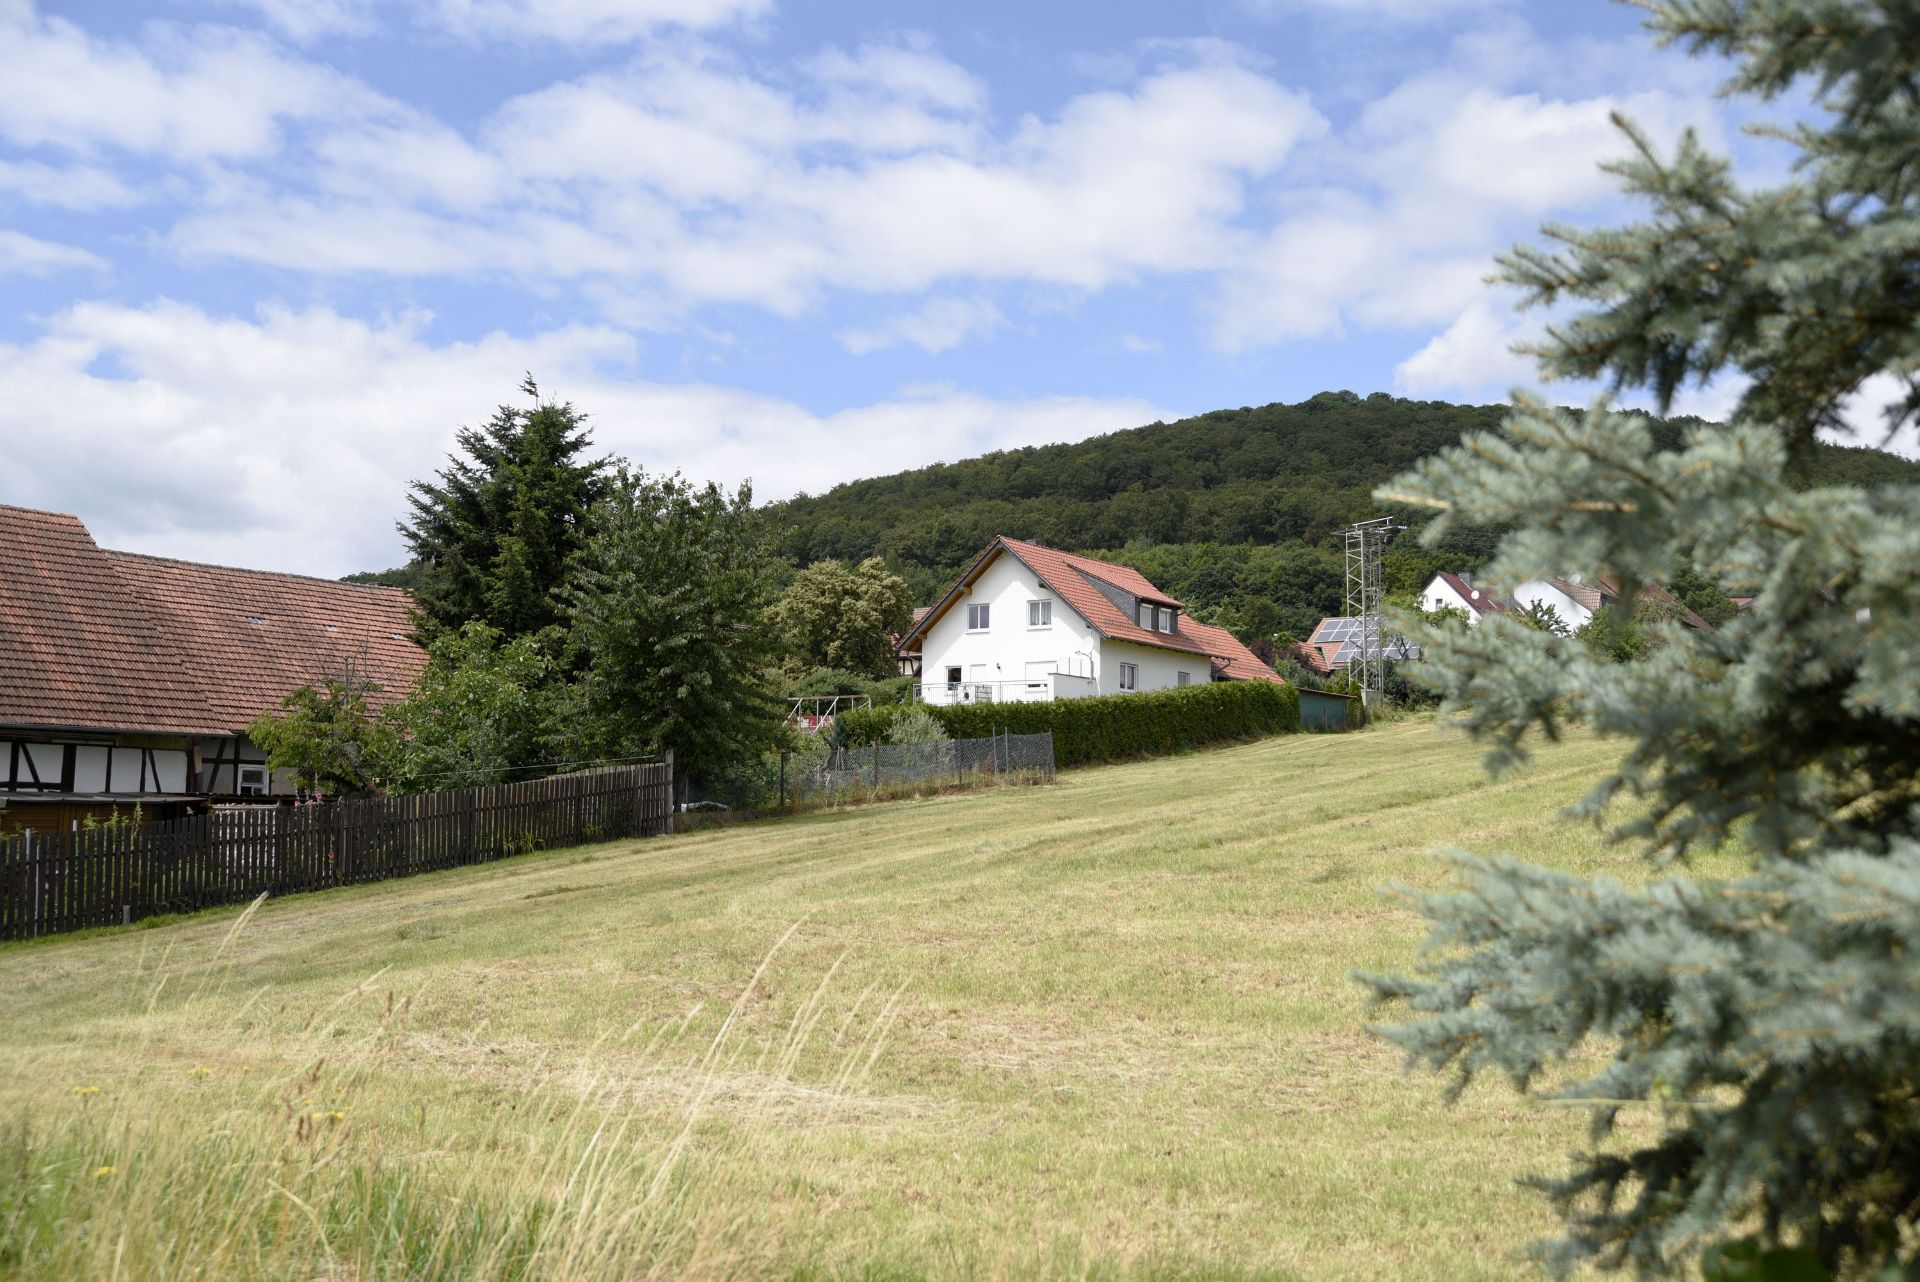 Freehold Property With 691 SQM Of Land In The Village Of Unterstoppel, Germany! - Image 42 of 60